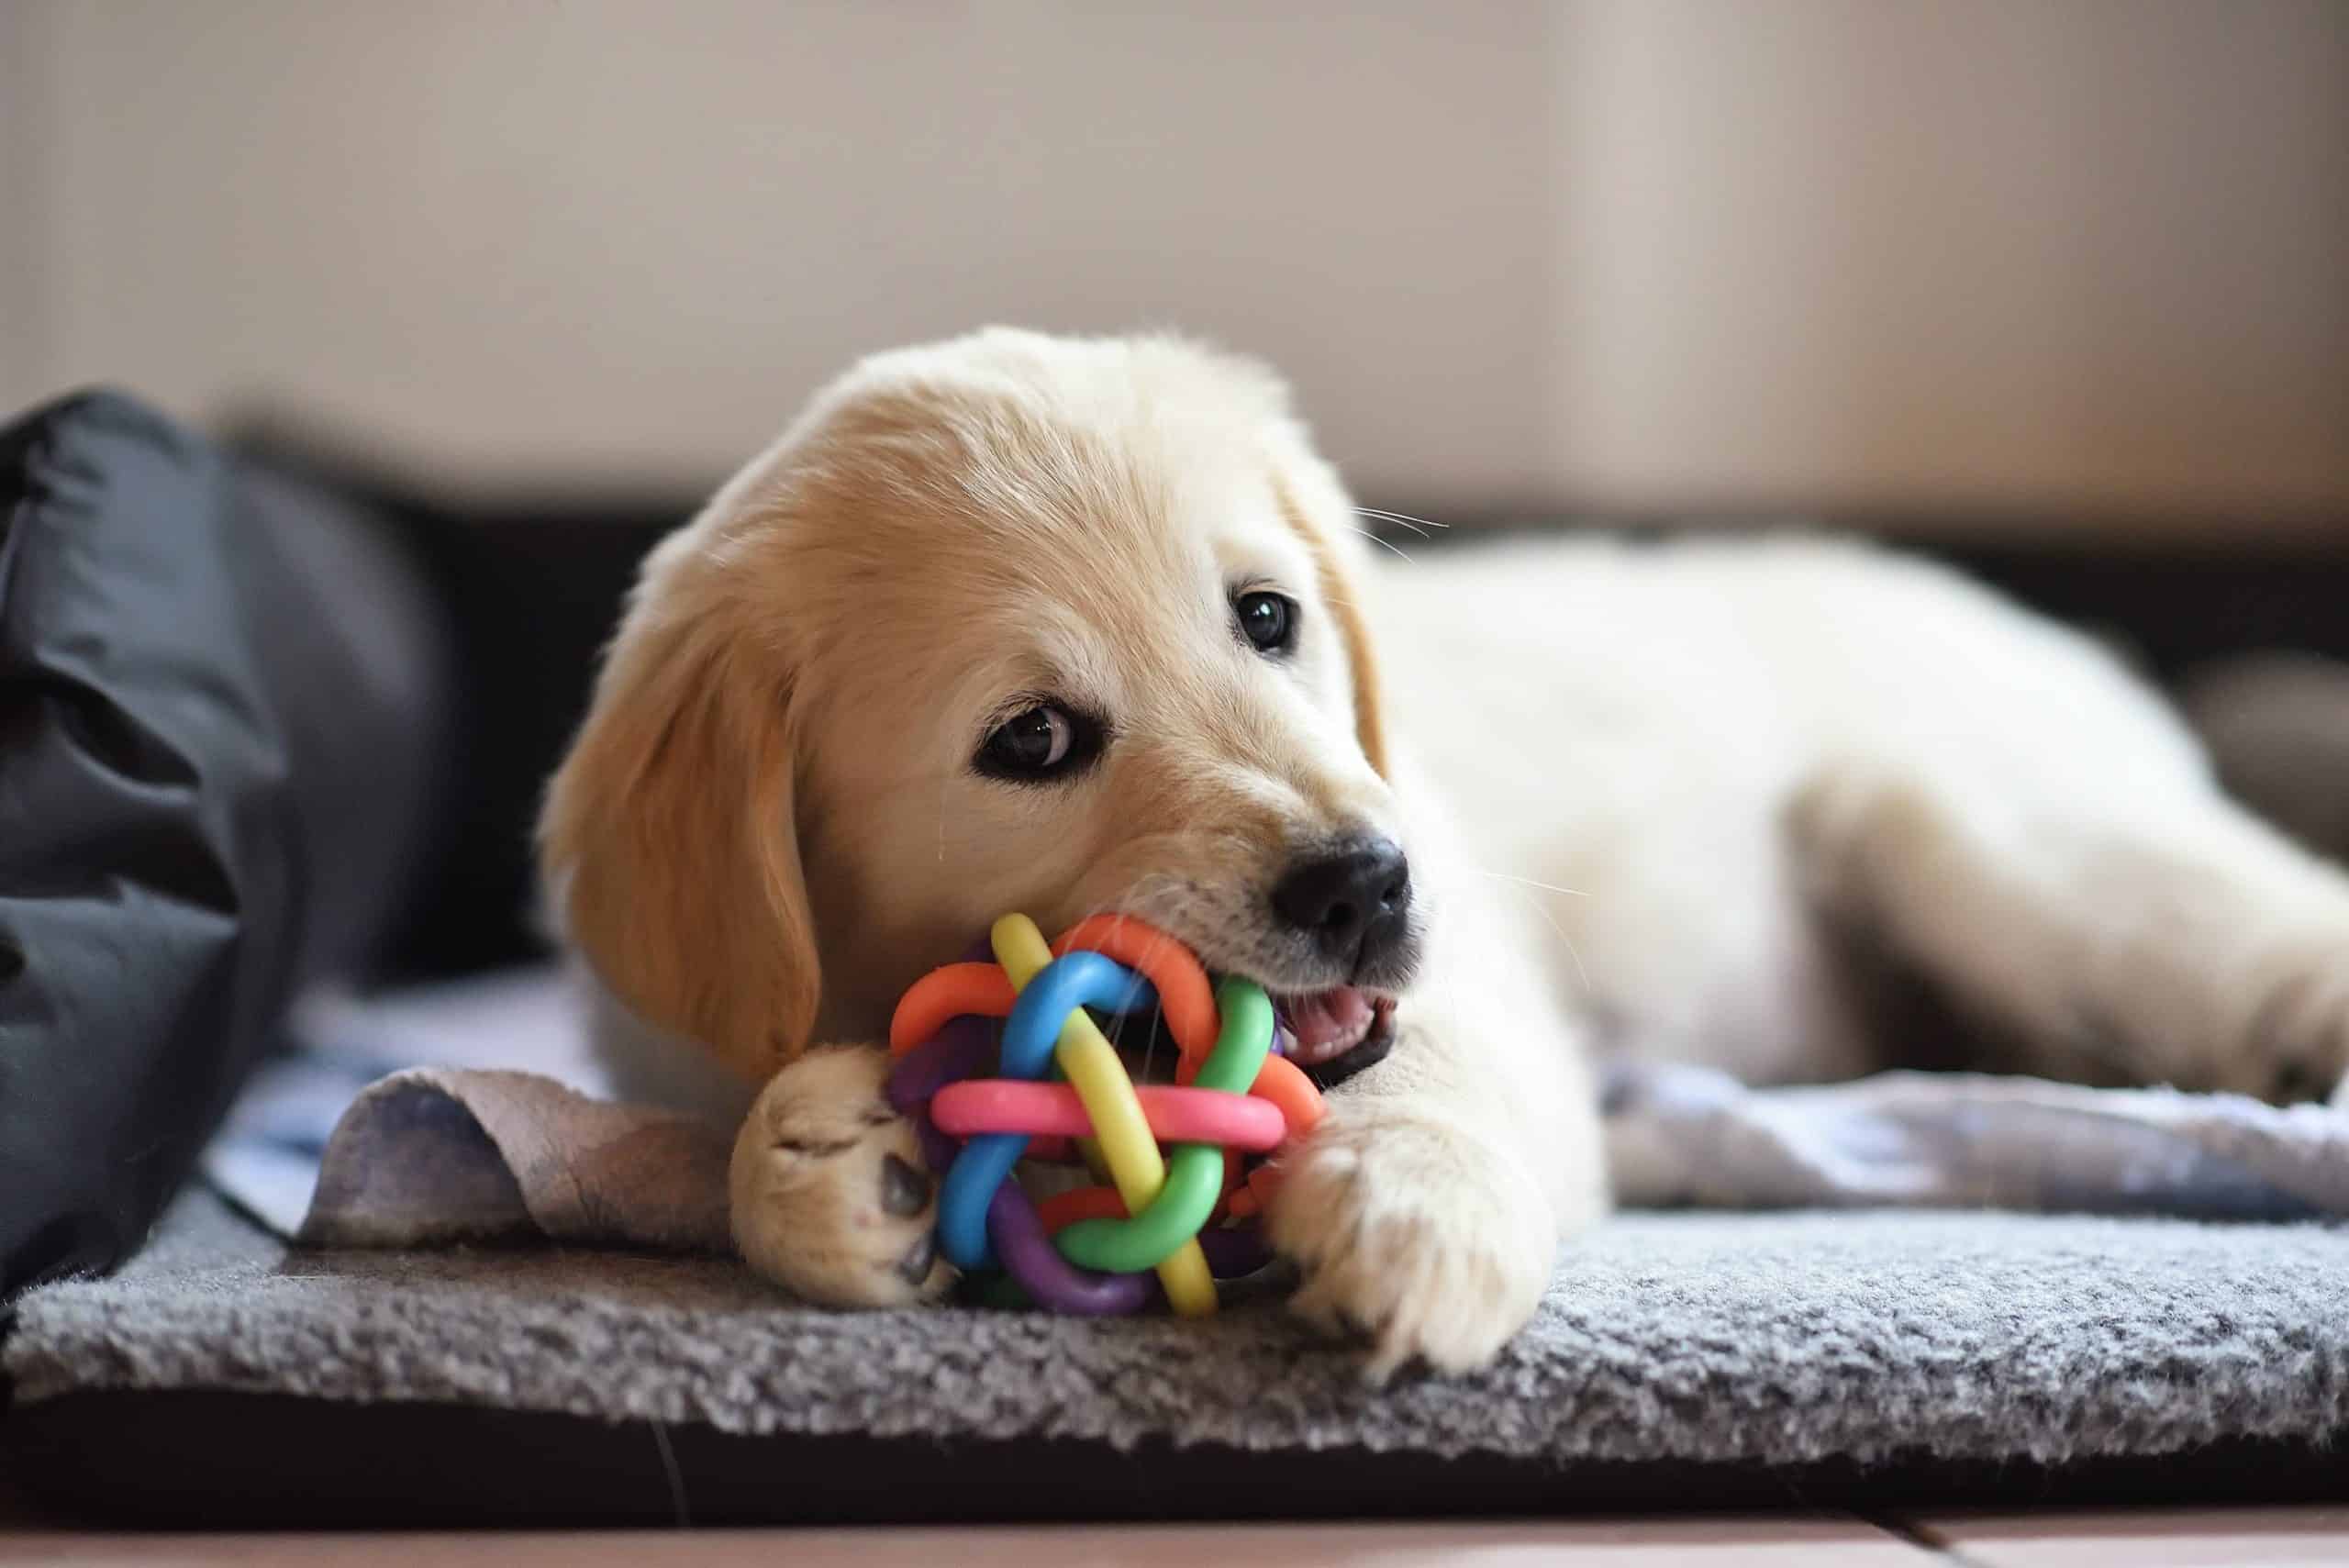 Golden retriever puppy chews on appropriate toy. Training tips: Provide appropriate chew toys to soothe your puppy's sore gums.